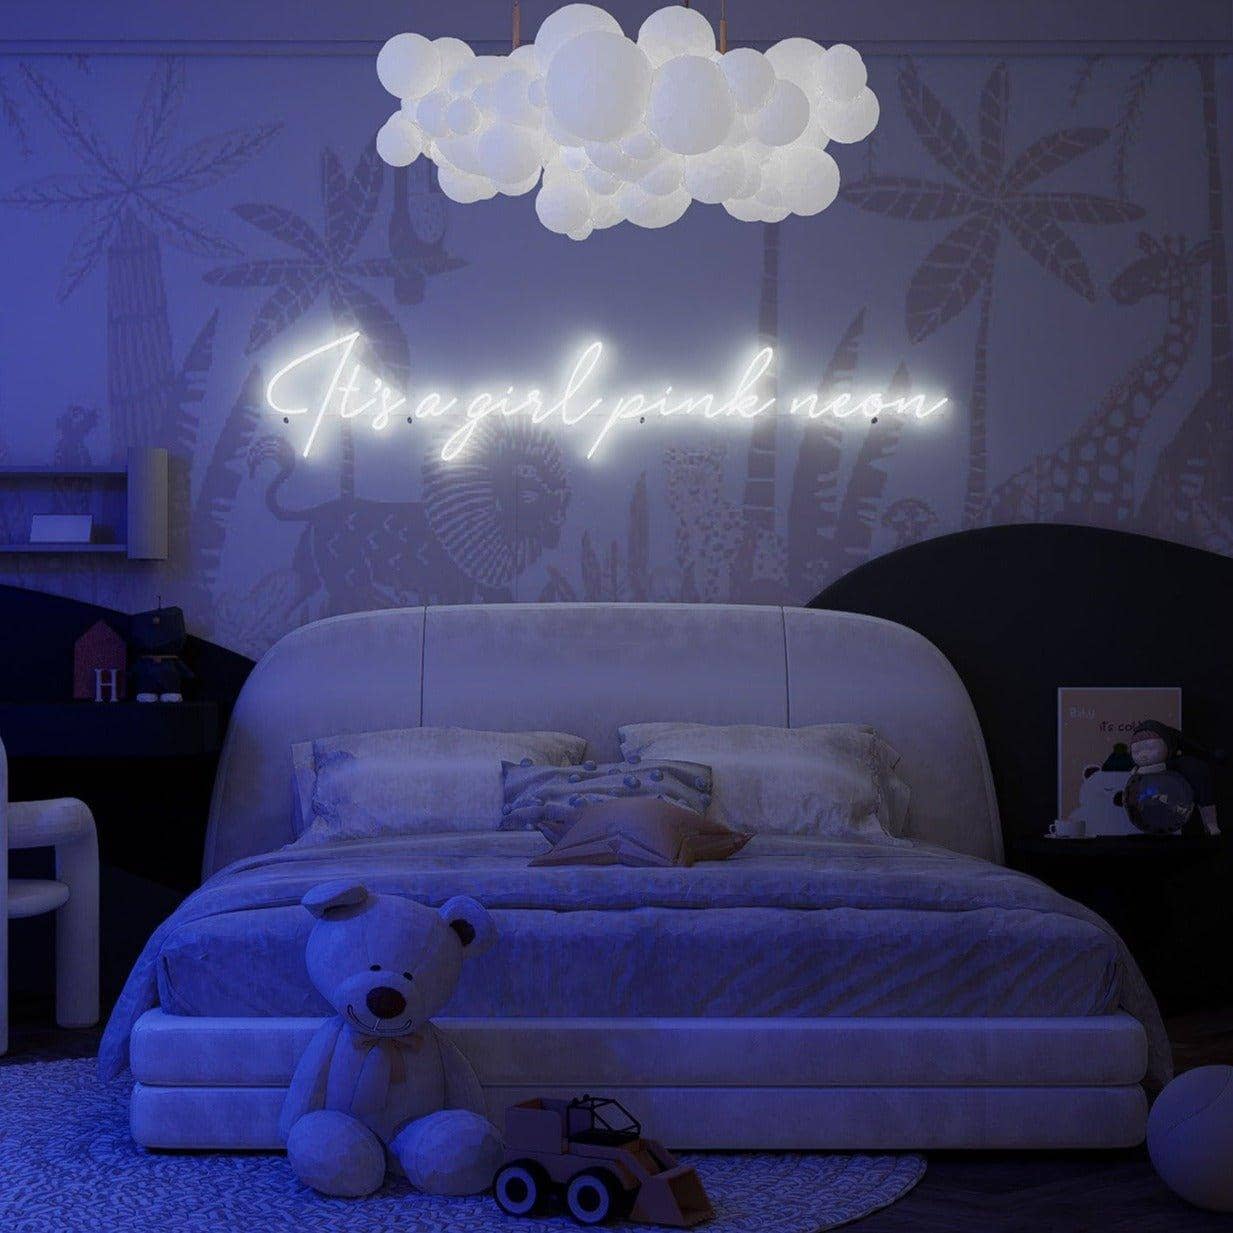 white-neon-lights-illuminated-at-night-and-hung-on-the-wall-for-display-it's-a-girl-pink-neon